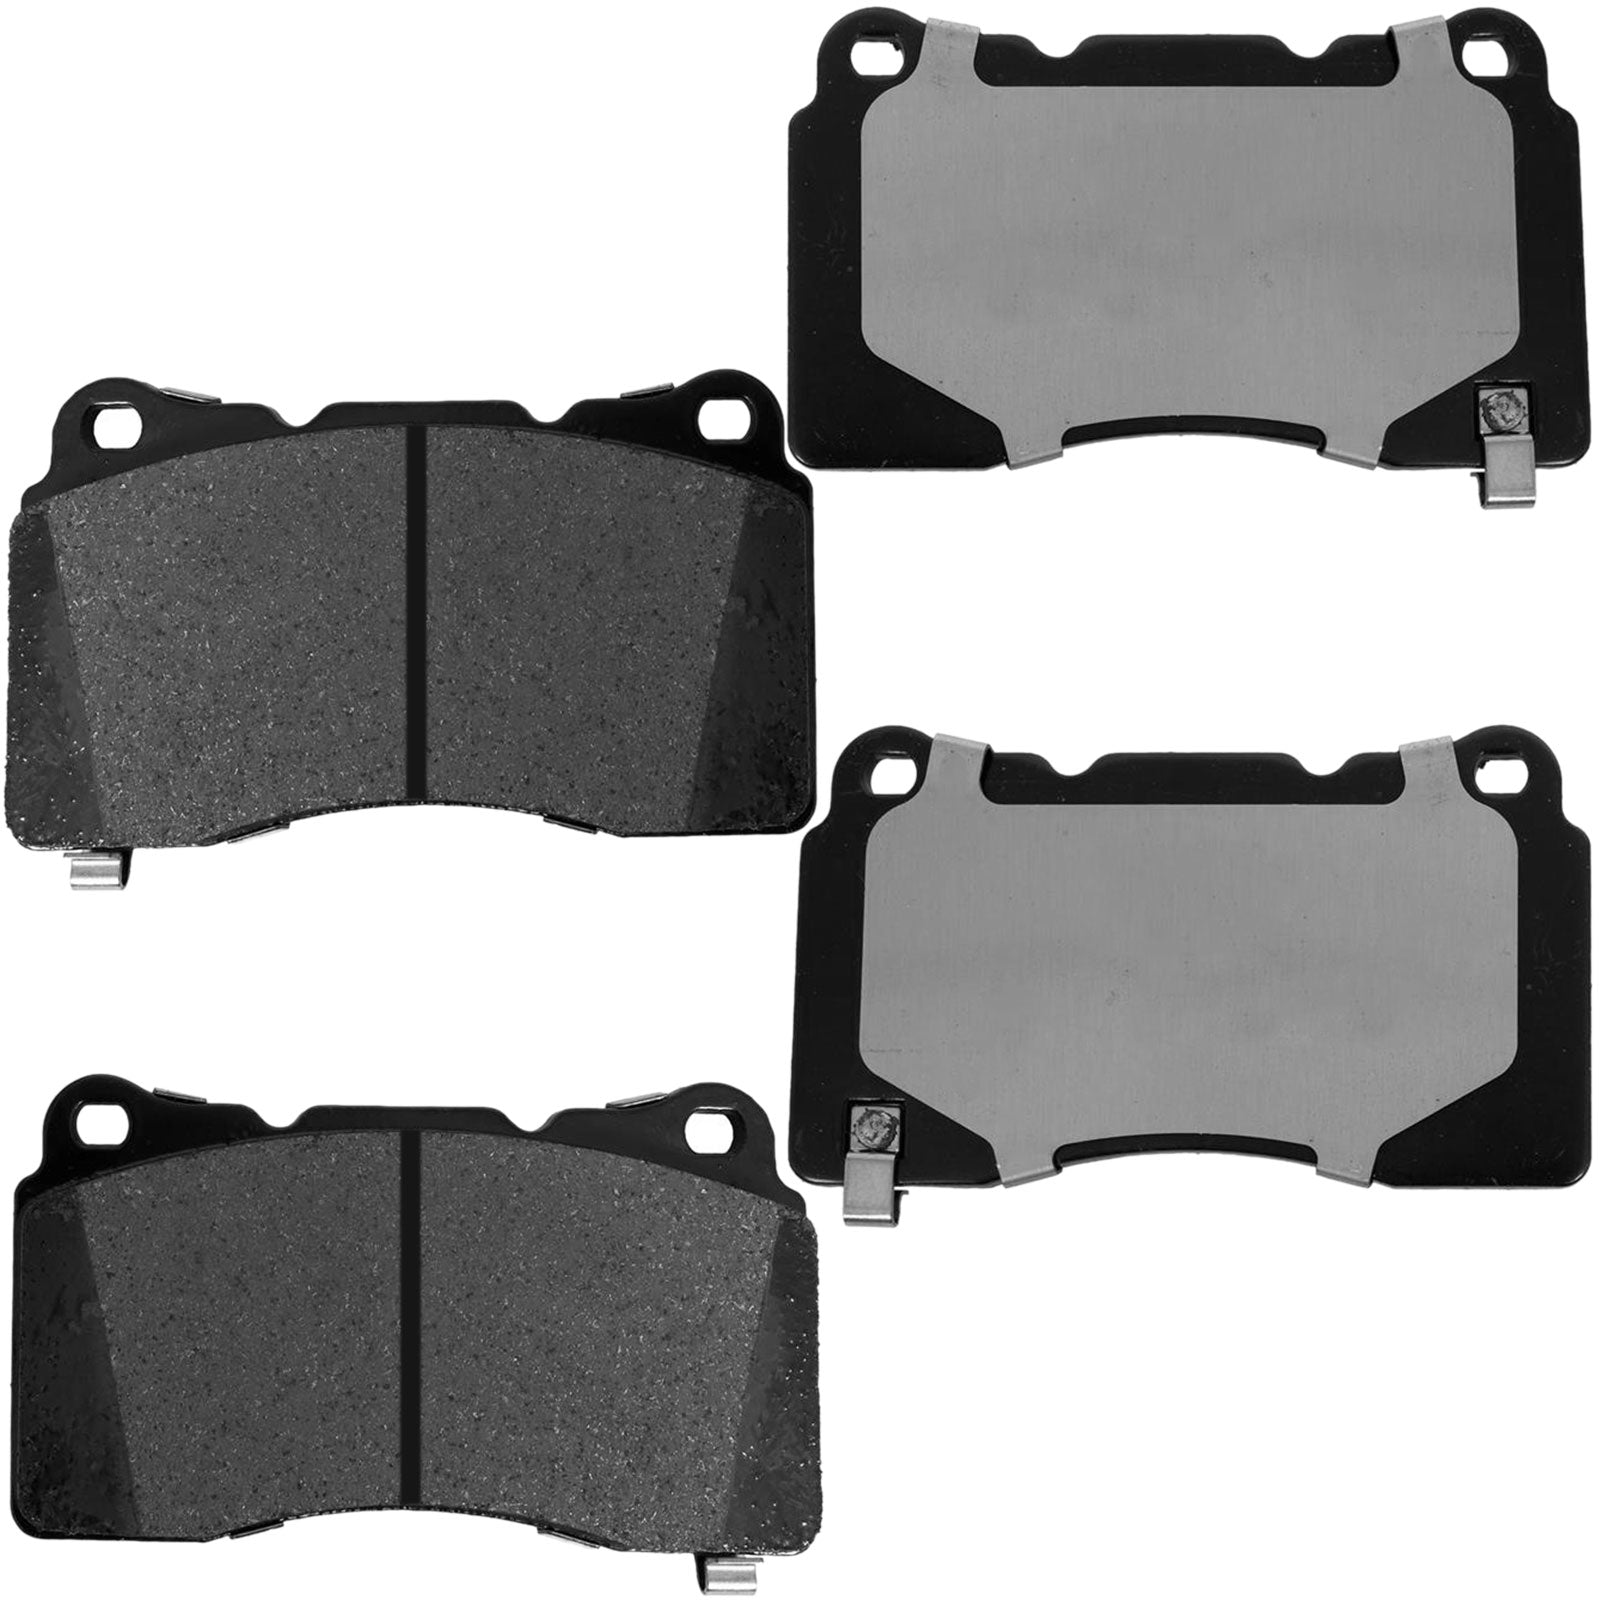 MotorbyMotor 4PC Front Ceramic Brake Pads with Hardware Kits, Buick Regal Sportback Tourx, Caillac ATS CT6 CTS STS XTS, Chevrolet Camaro Corvette, Ford GT Mustang, Hyundai Genesis Coupe, Pontiac G8 MotorbyMotor